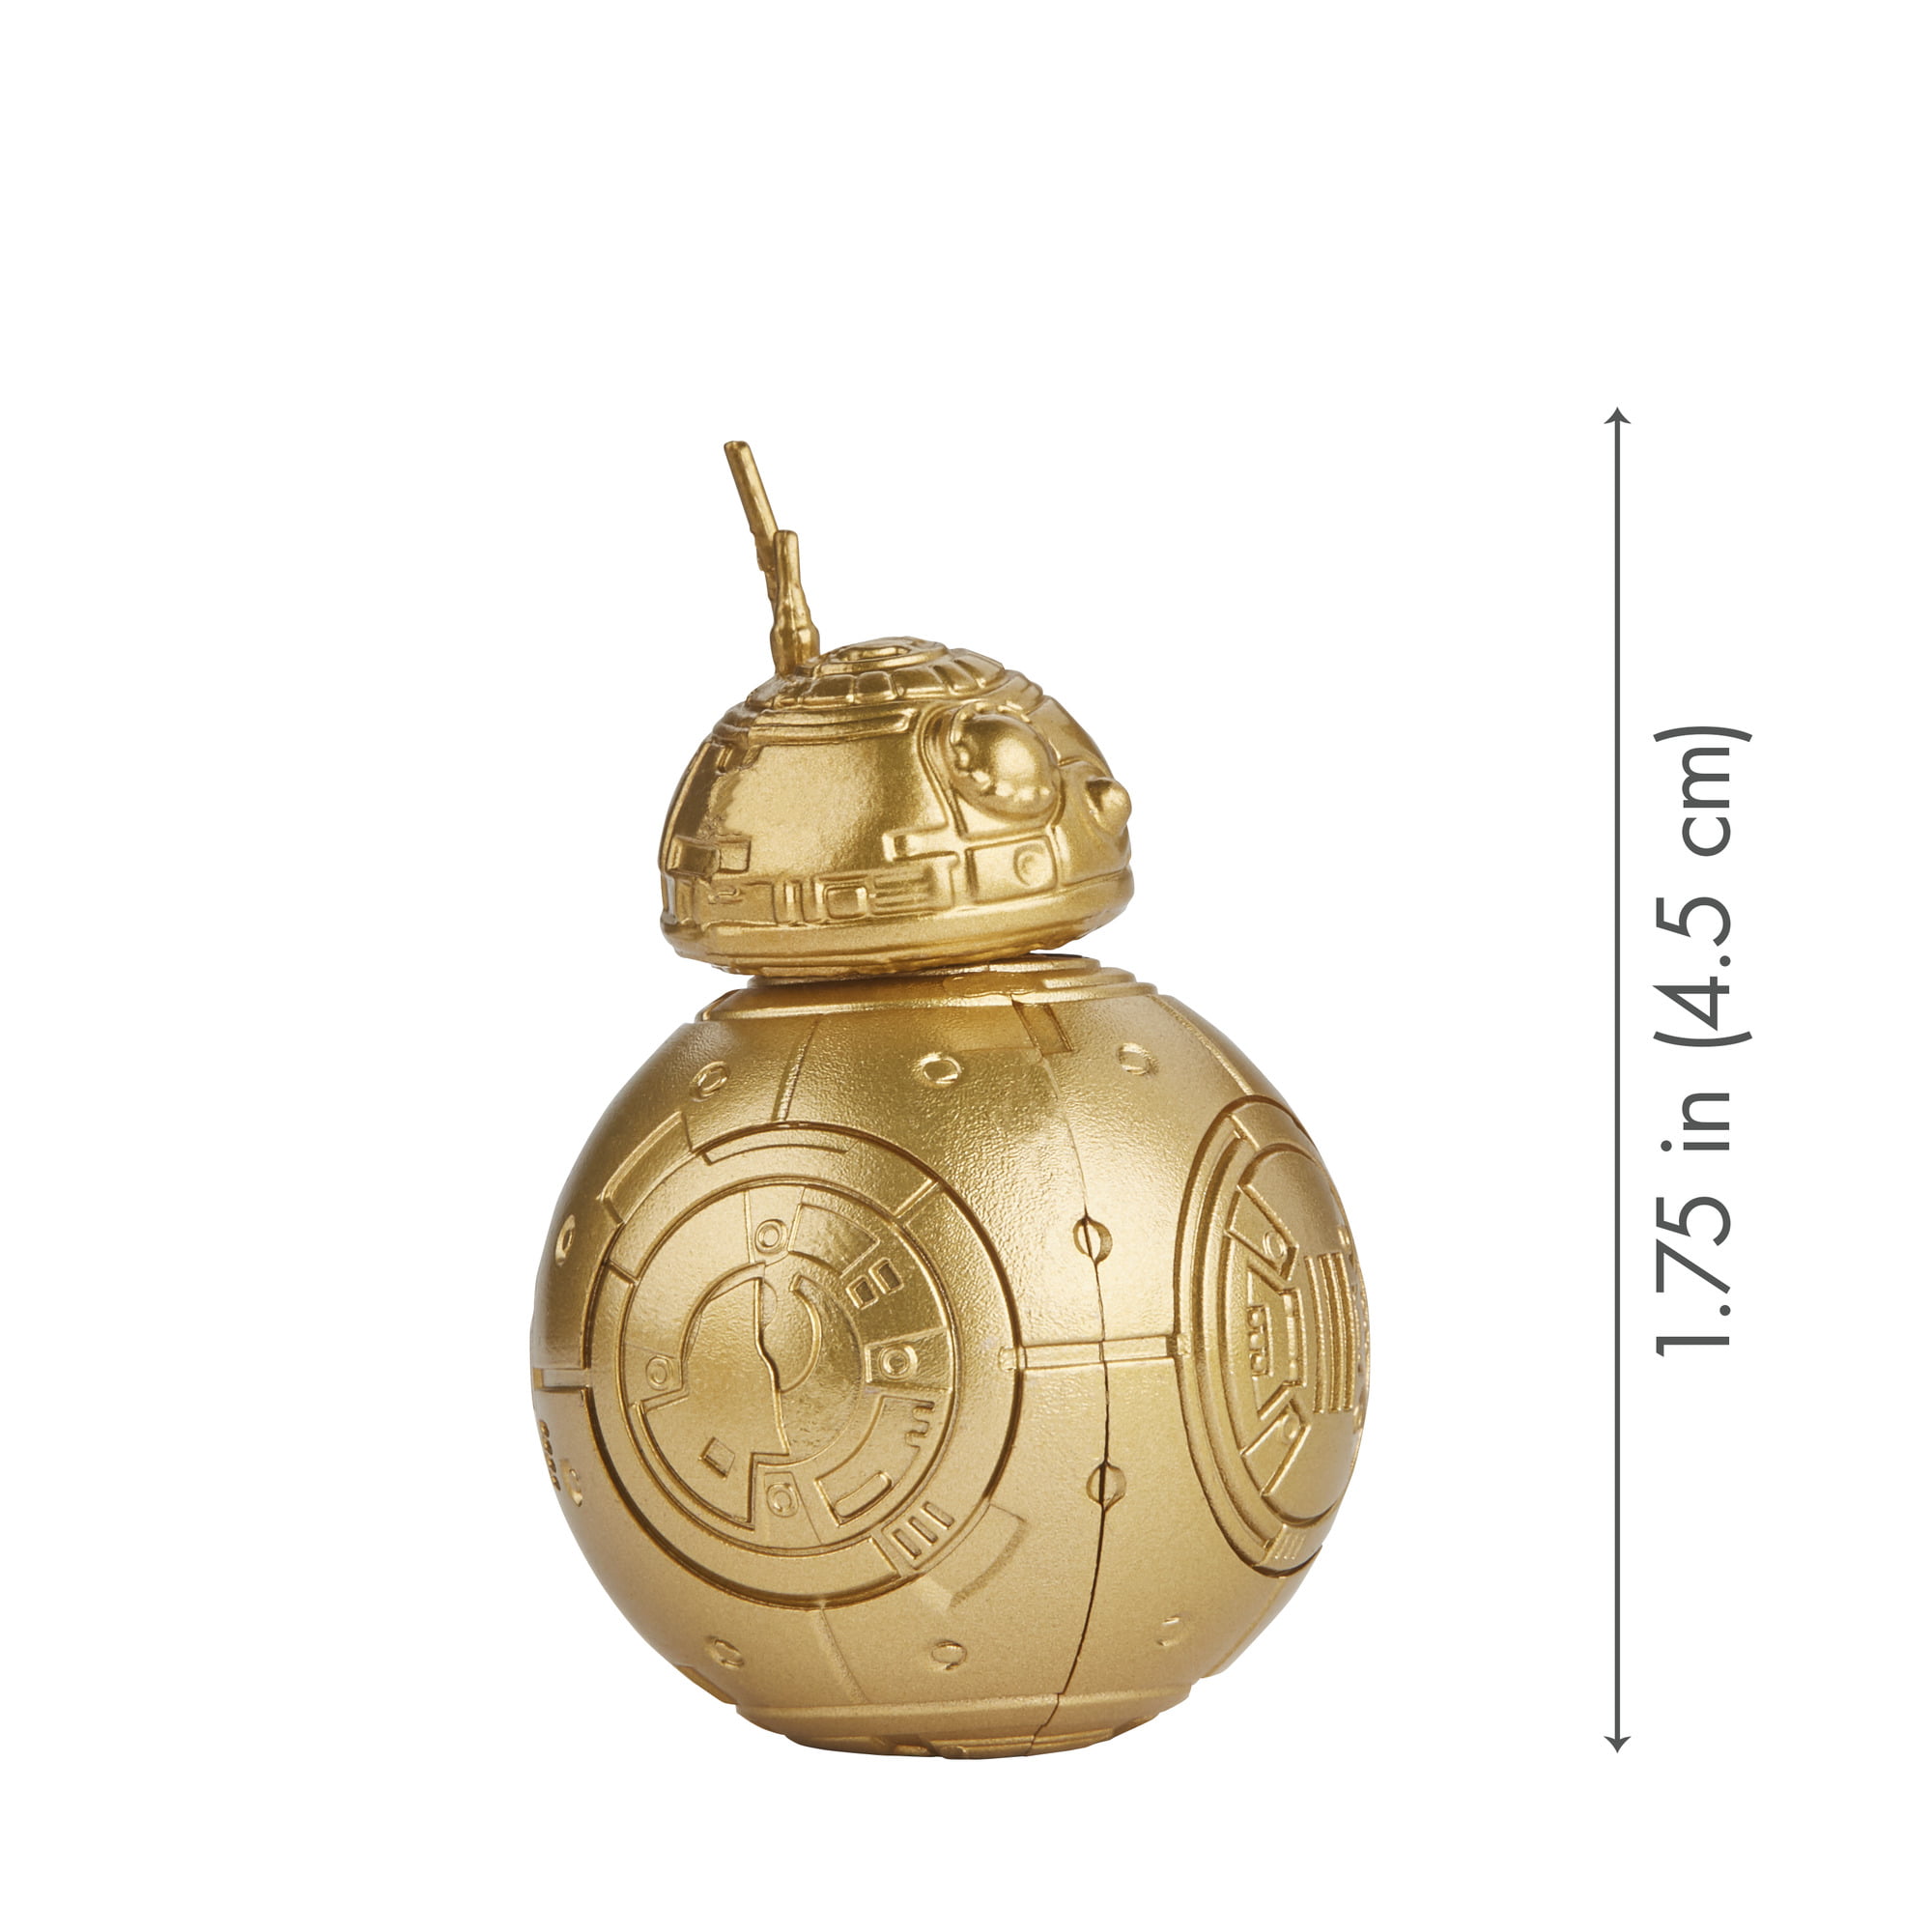 STAR WARS 3 PACK C-3PO BB-8 R2-D2 Gold commemorative Walmart EXCLUSIVE edition 